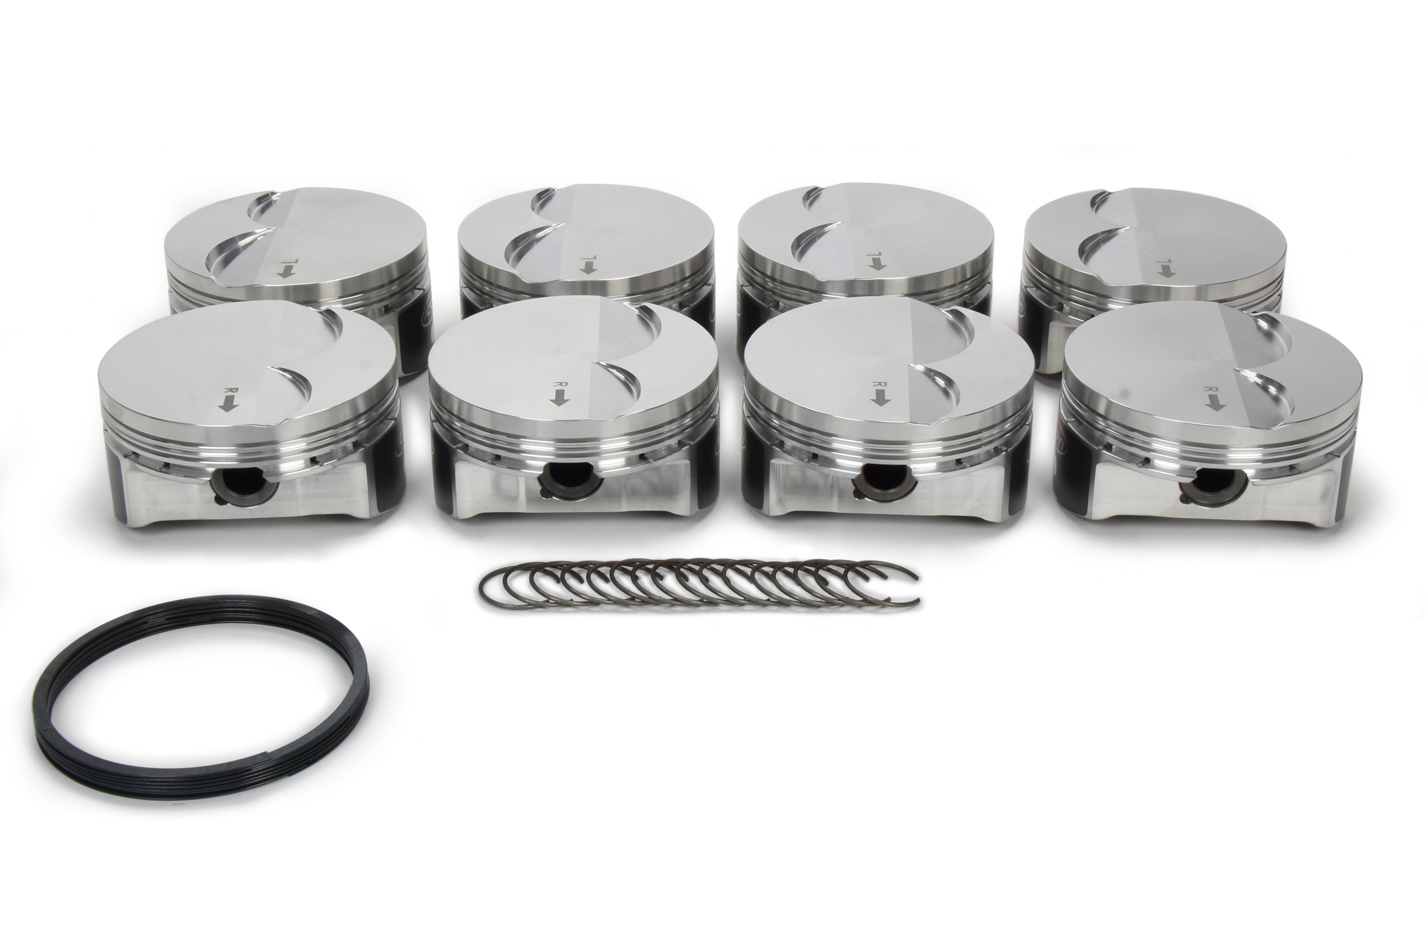 Icon Pistons IC552C.030 Piston, Premium Forged, Forged, 4.030 in Bore, 1.2 x 1.2 x 3.0 mm Ring Groove, Minus 4.00 cc, GM LS-Series, Set of 8